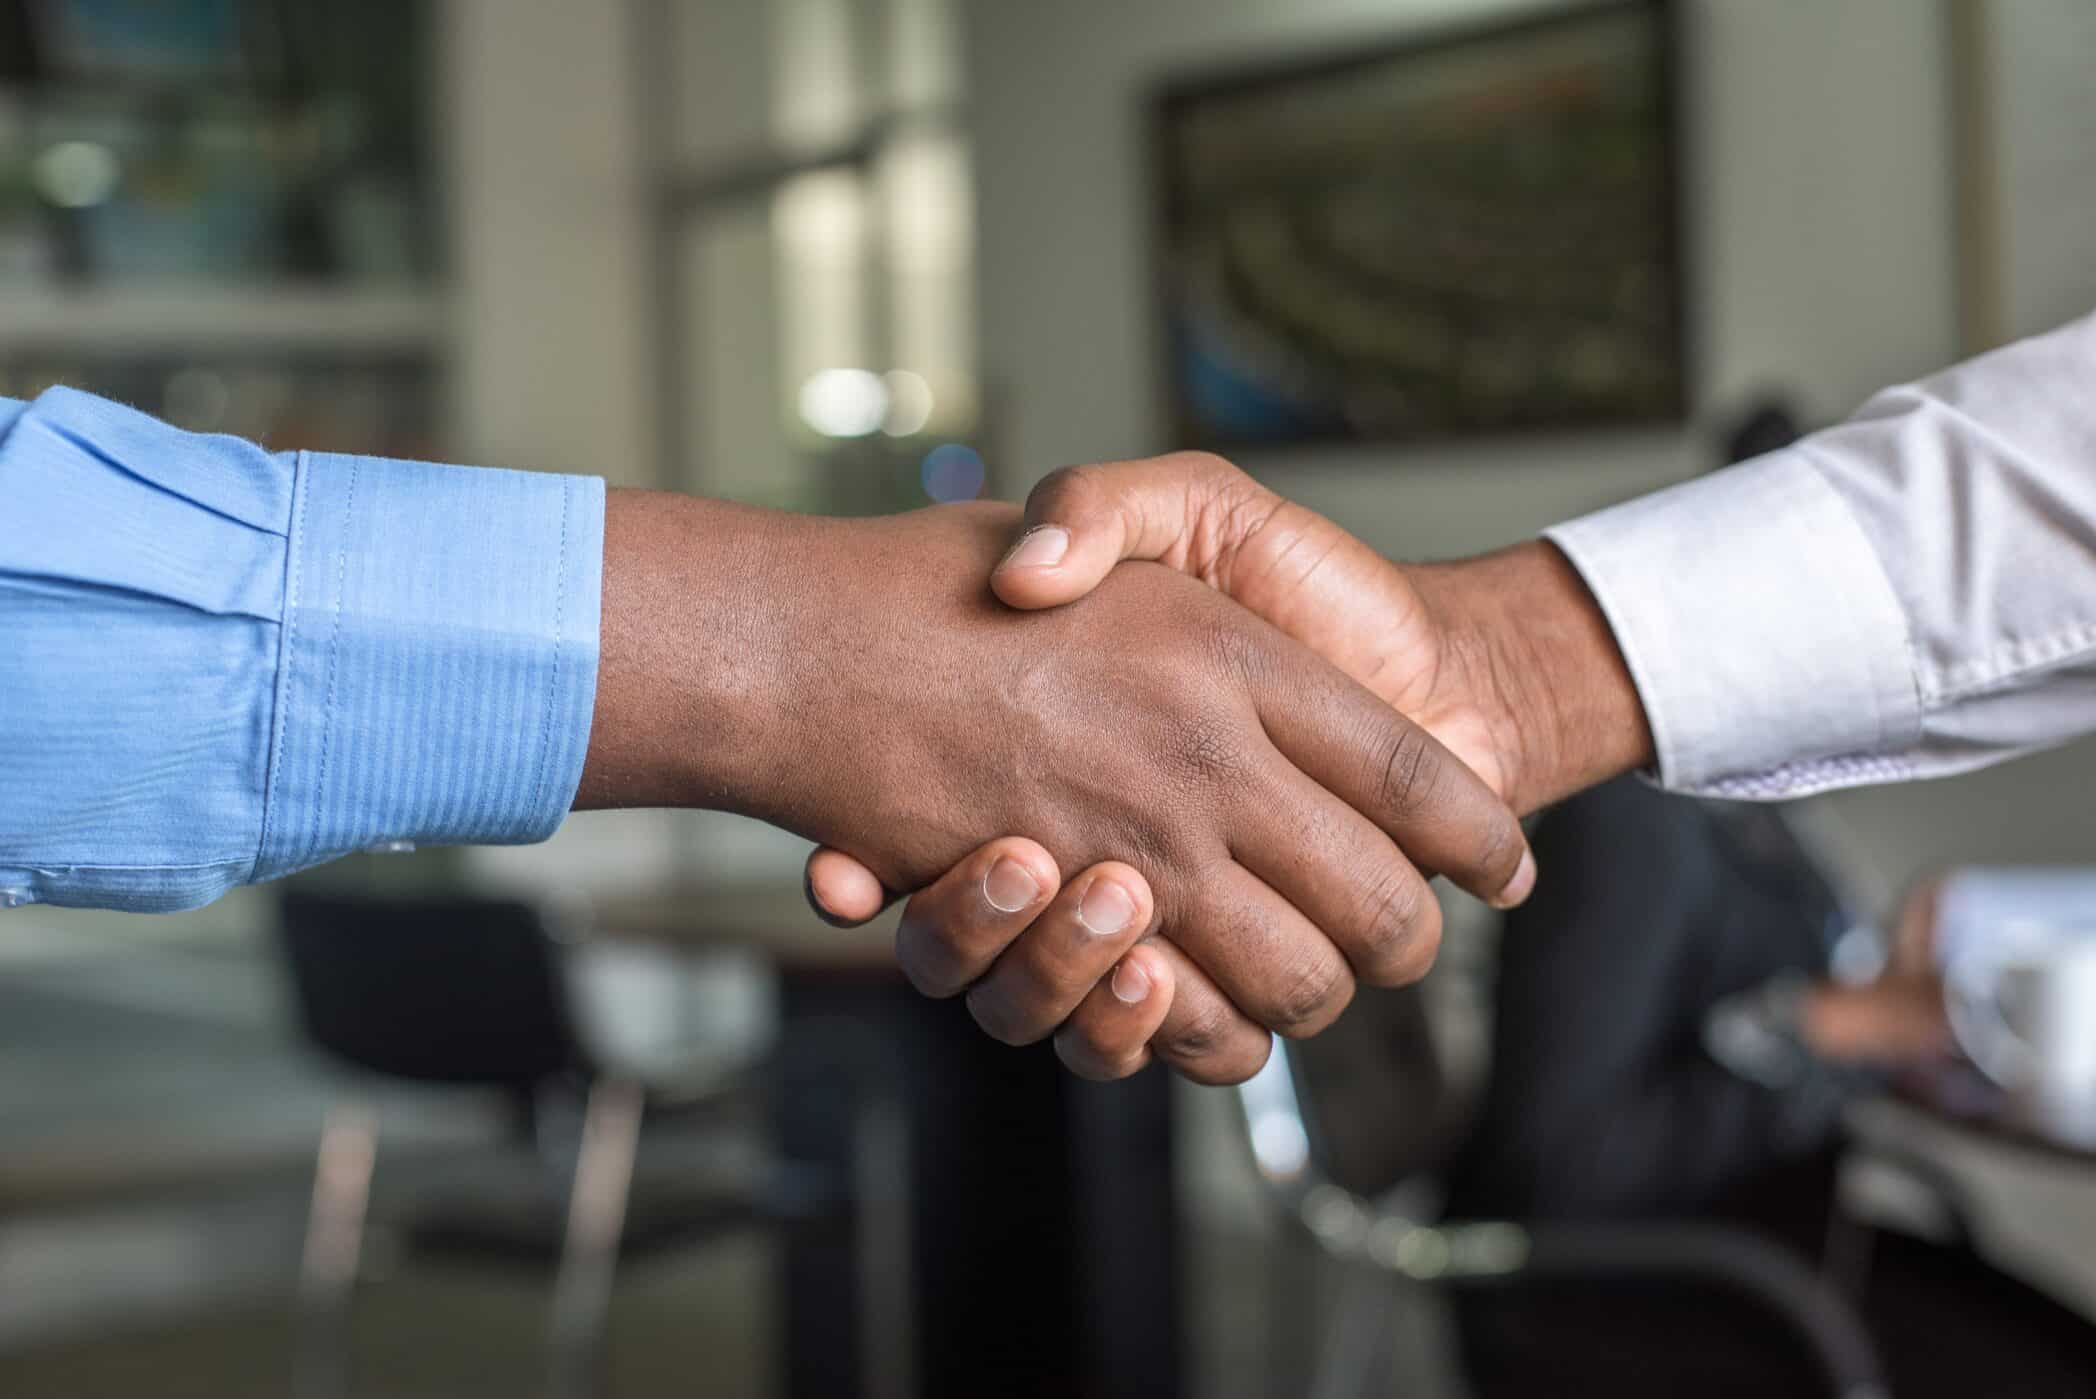 A close up photo of two men's hands clasped together in a handshake.